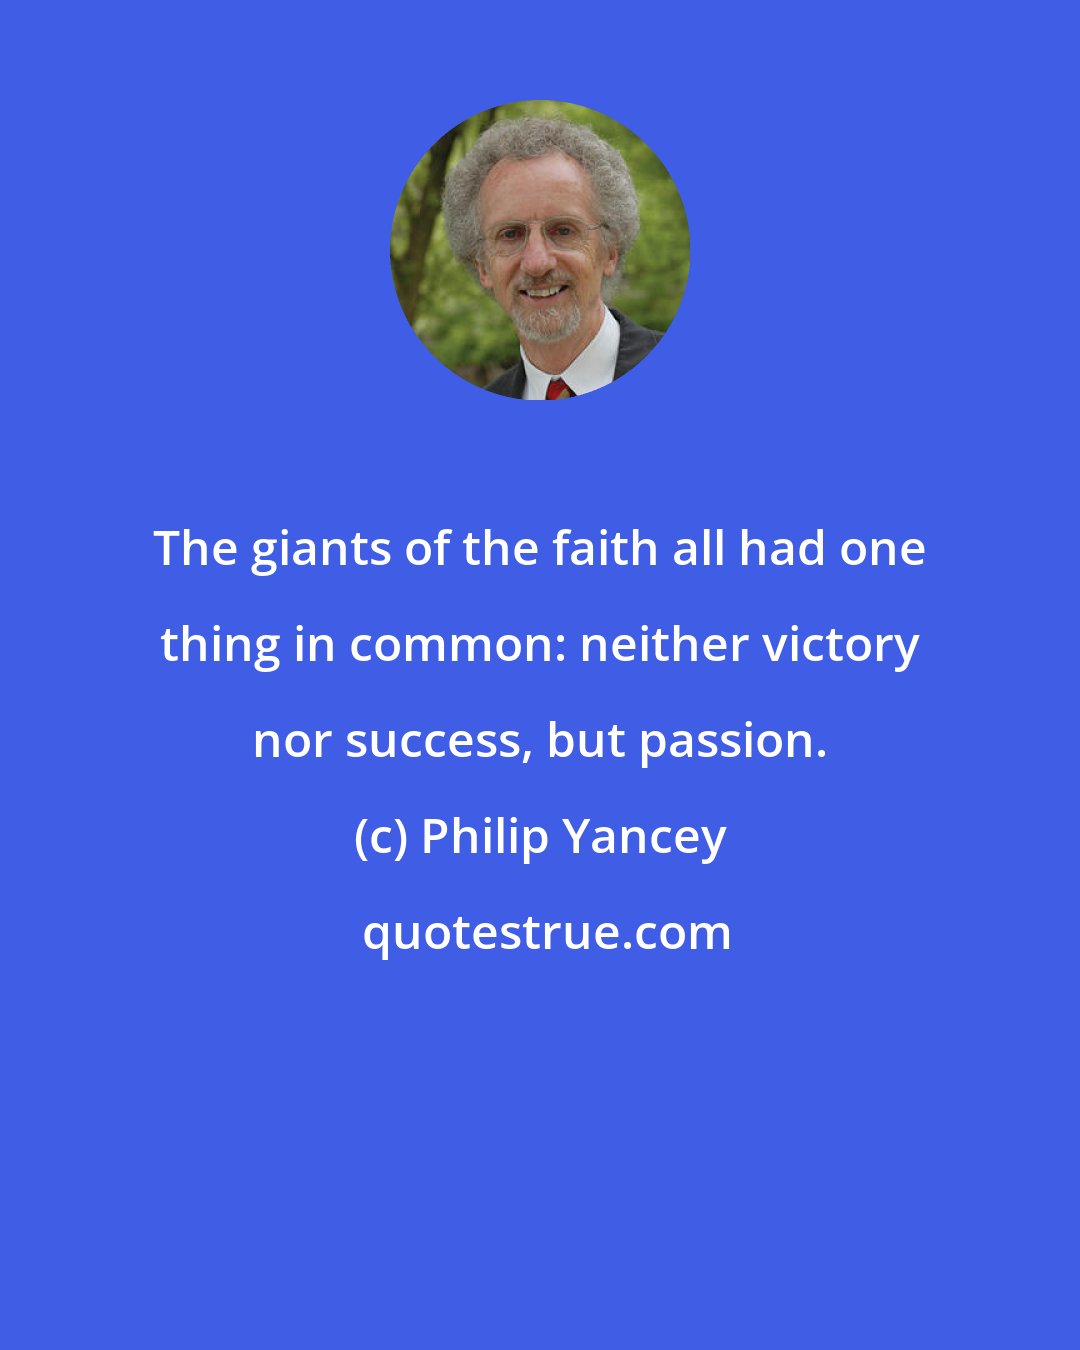 Philip Yancey: The giants of the faith all had one thing in common: neither victory nor success, but passion.